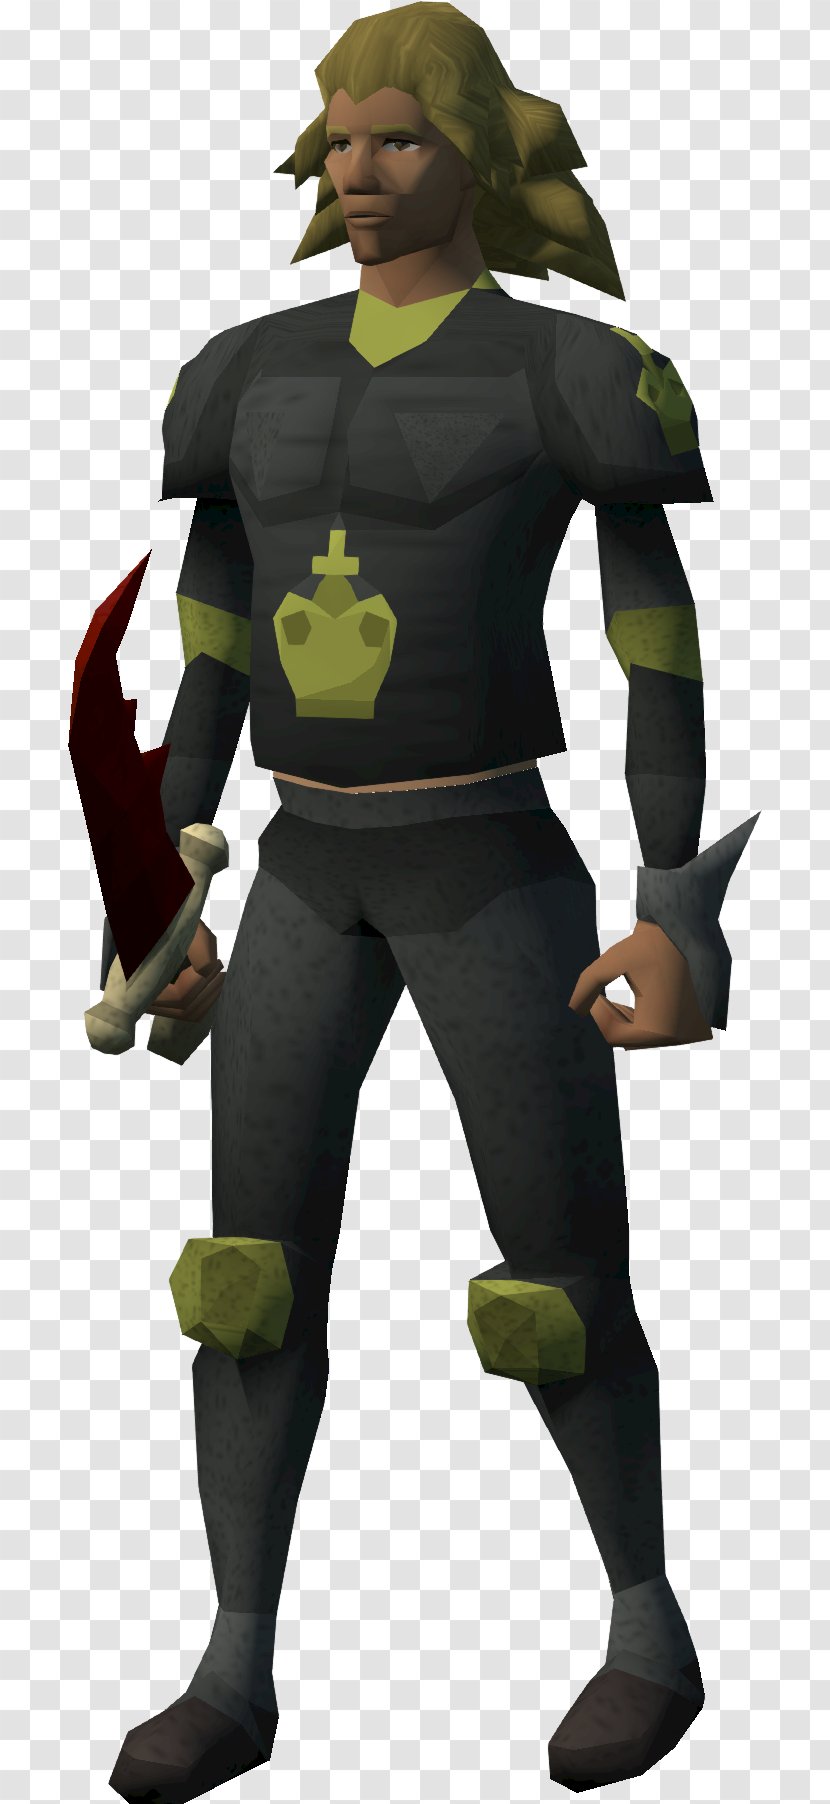 RuneScape Koschei He-Man Prince King - Player Character - Old Transparent PNG